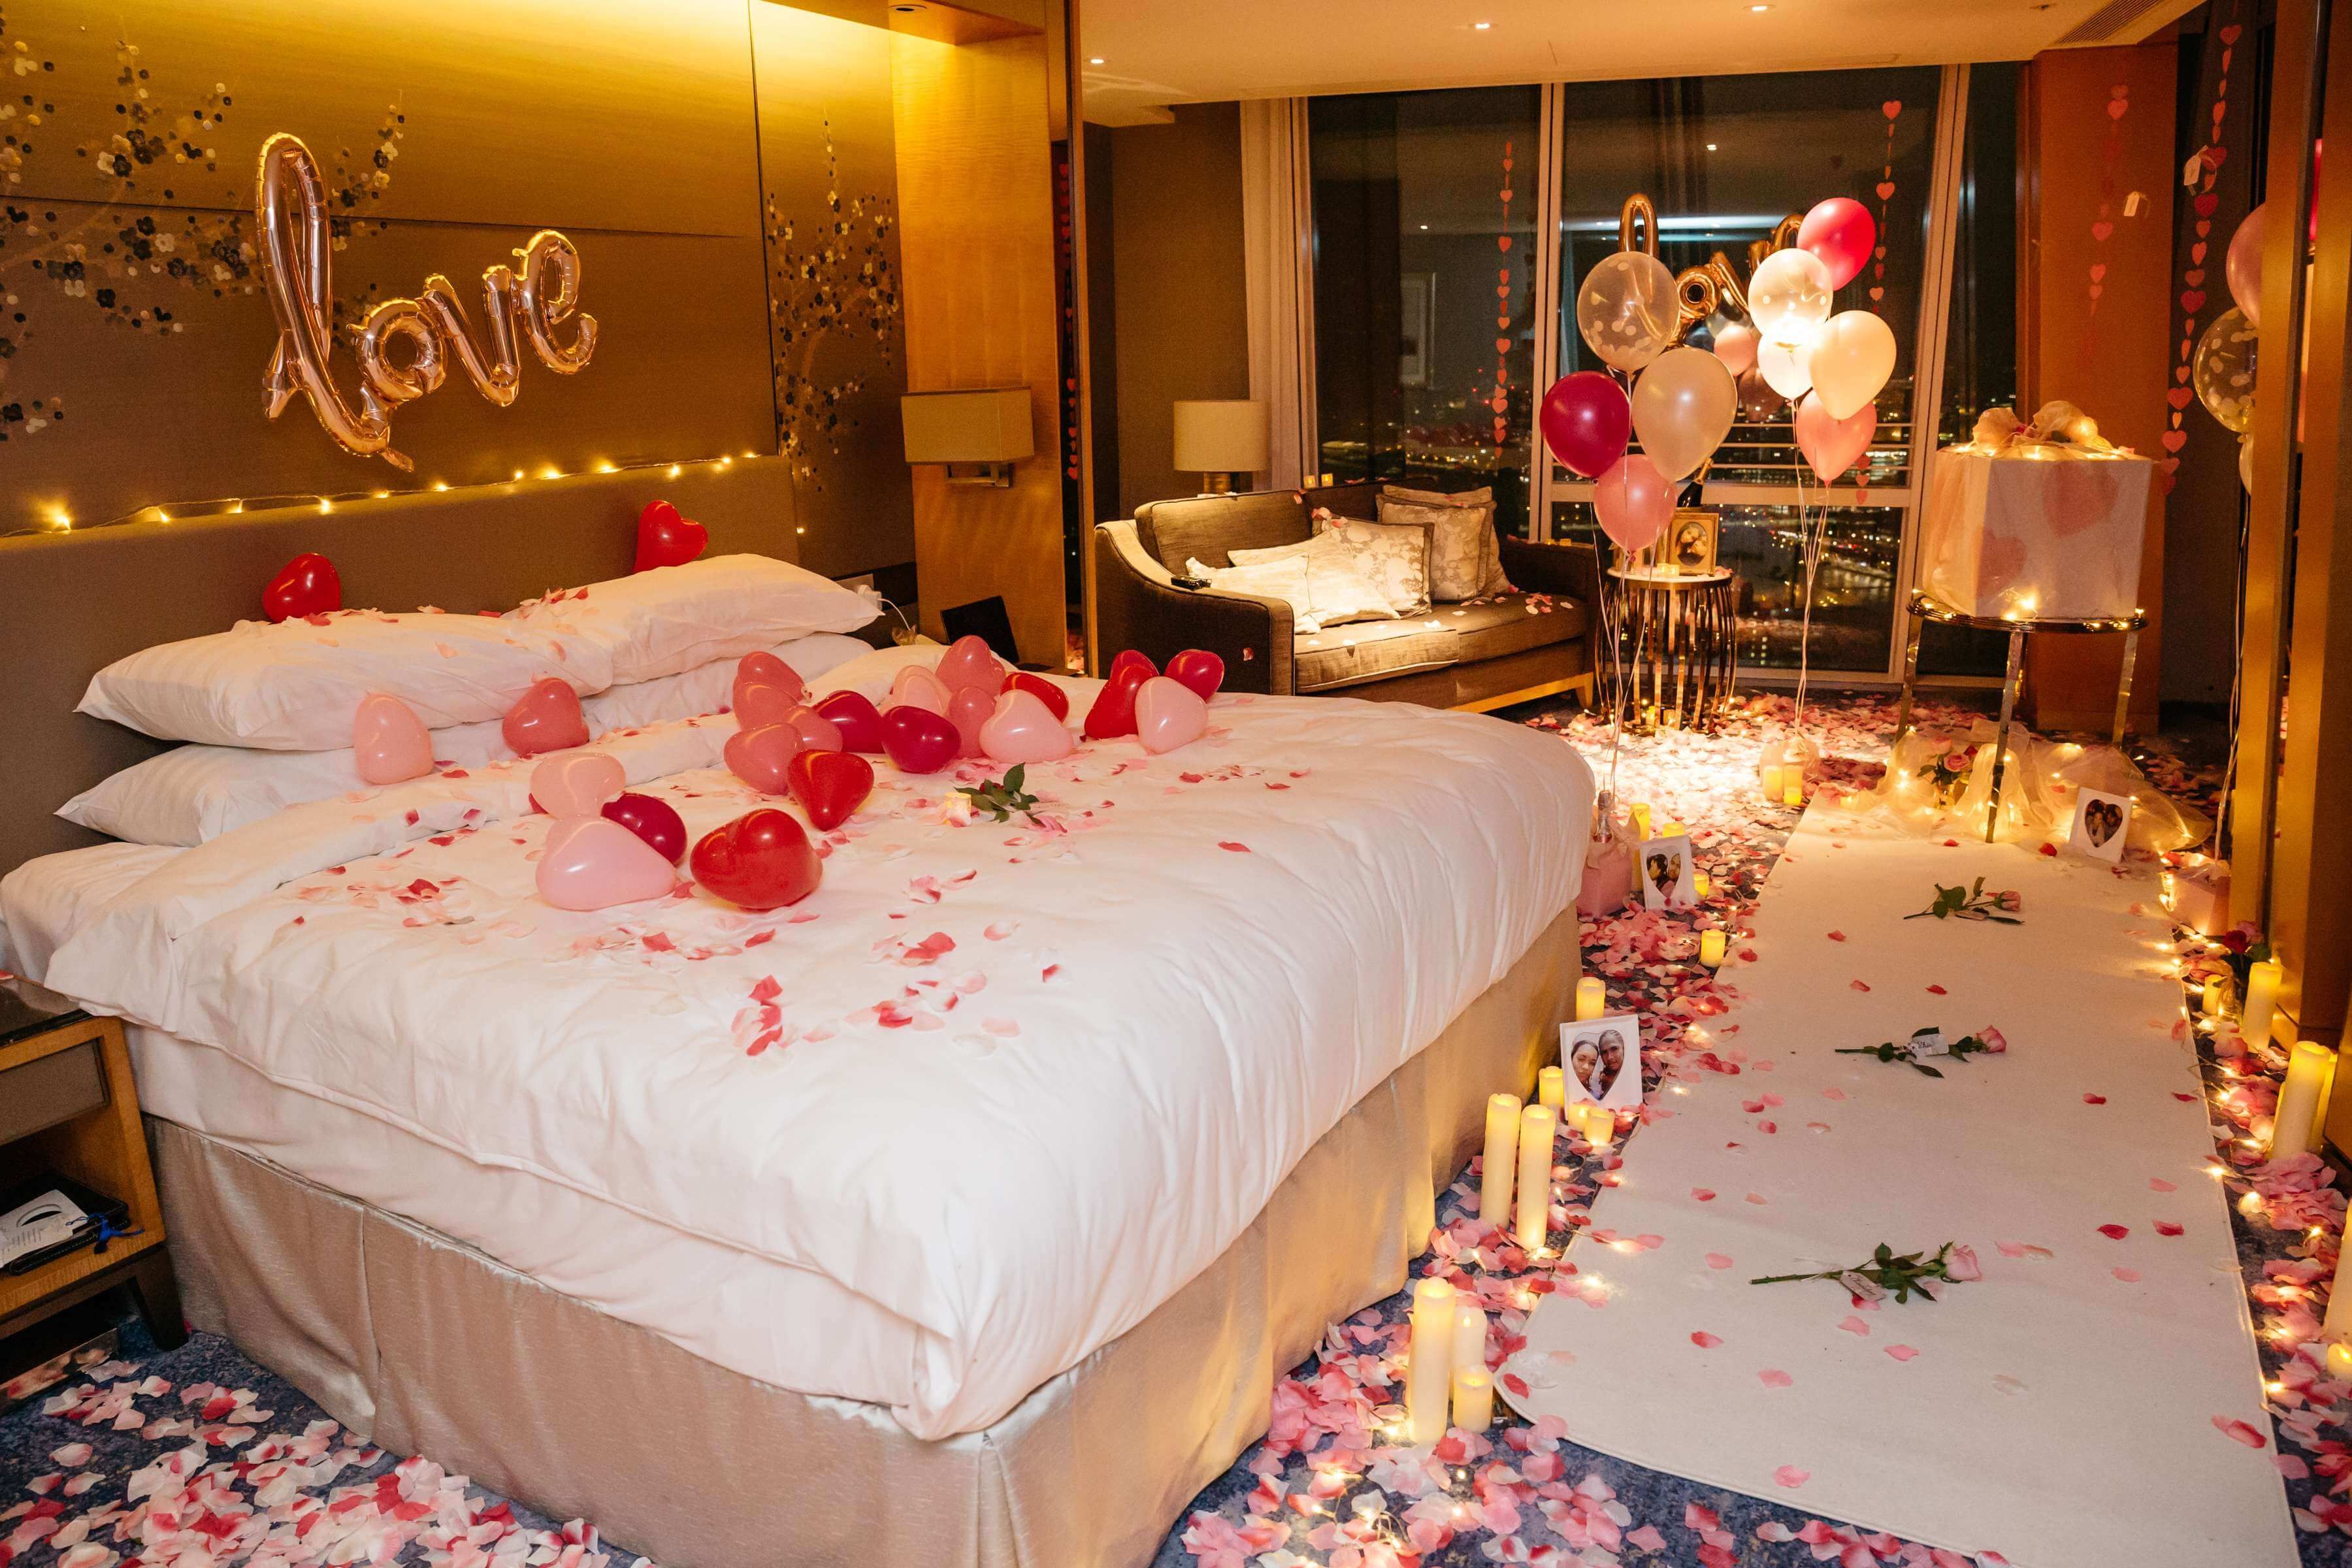 Romantic Ideas For A Hotel Room